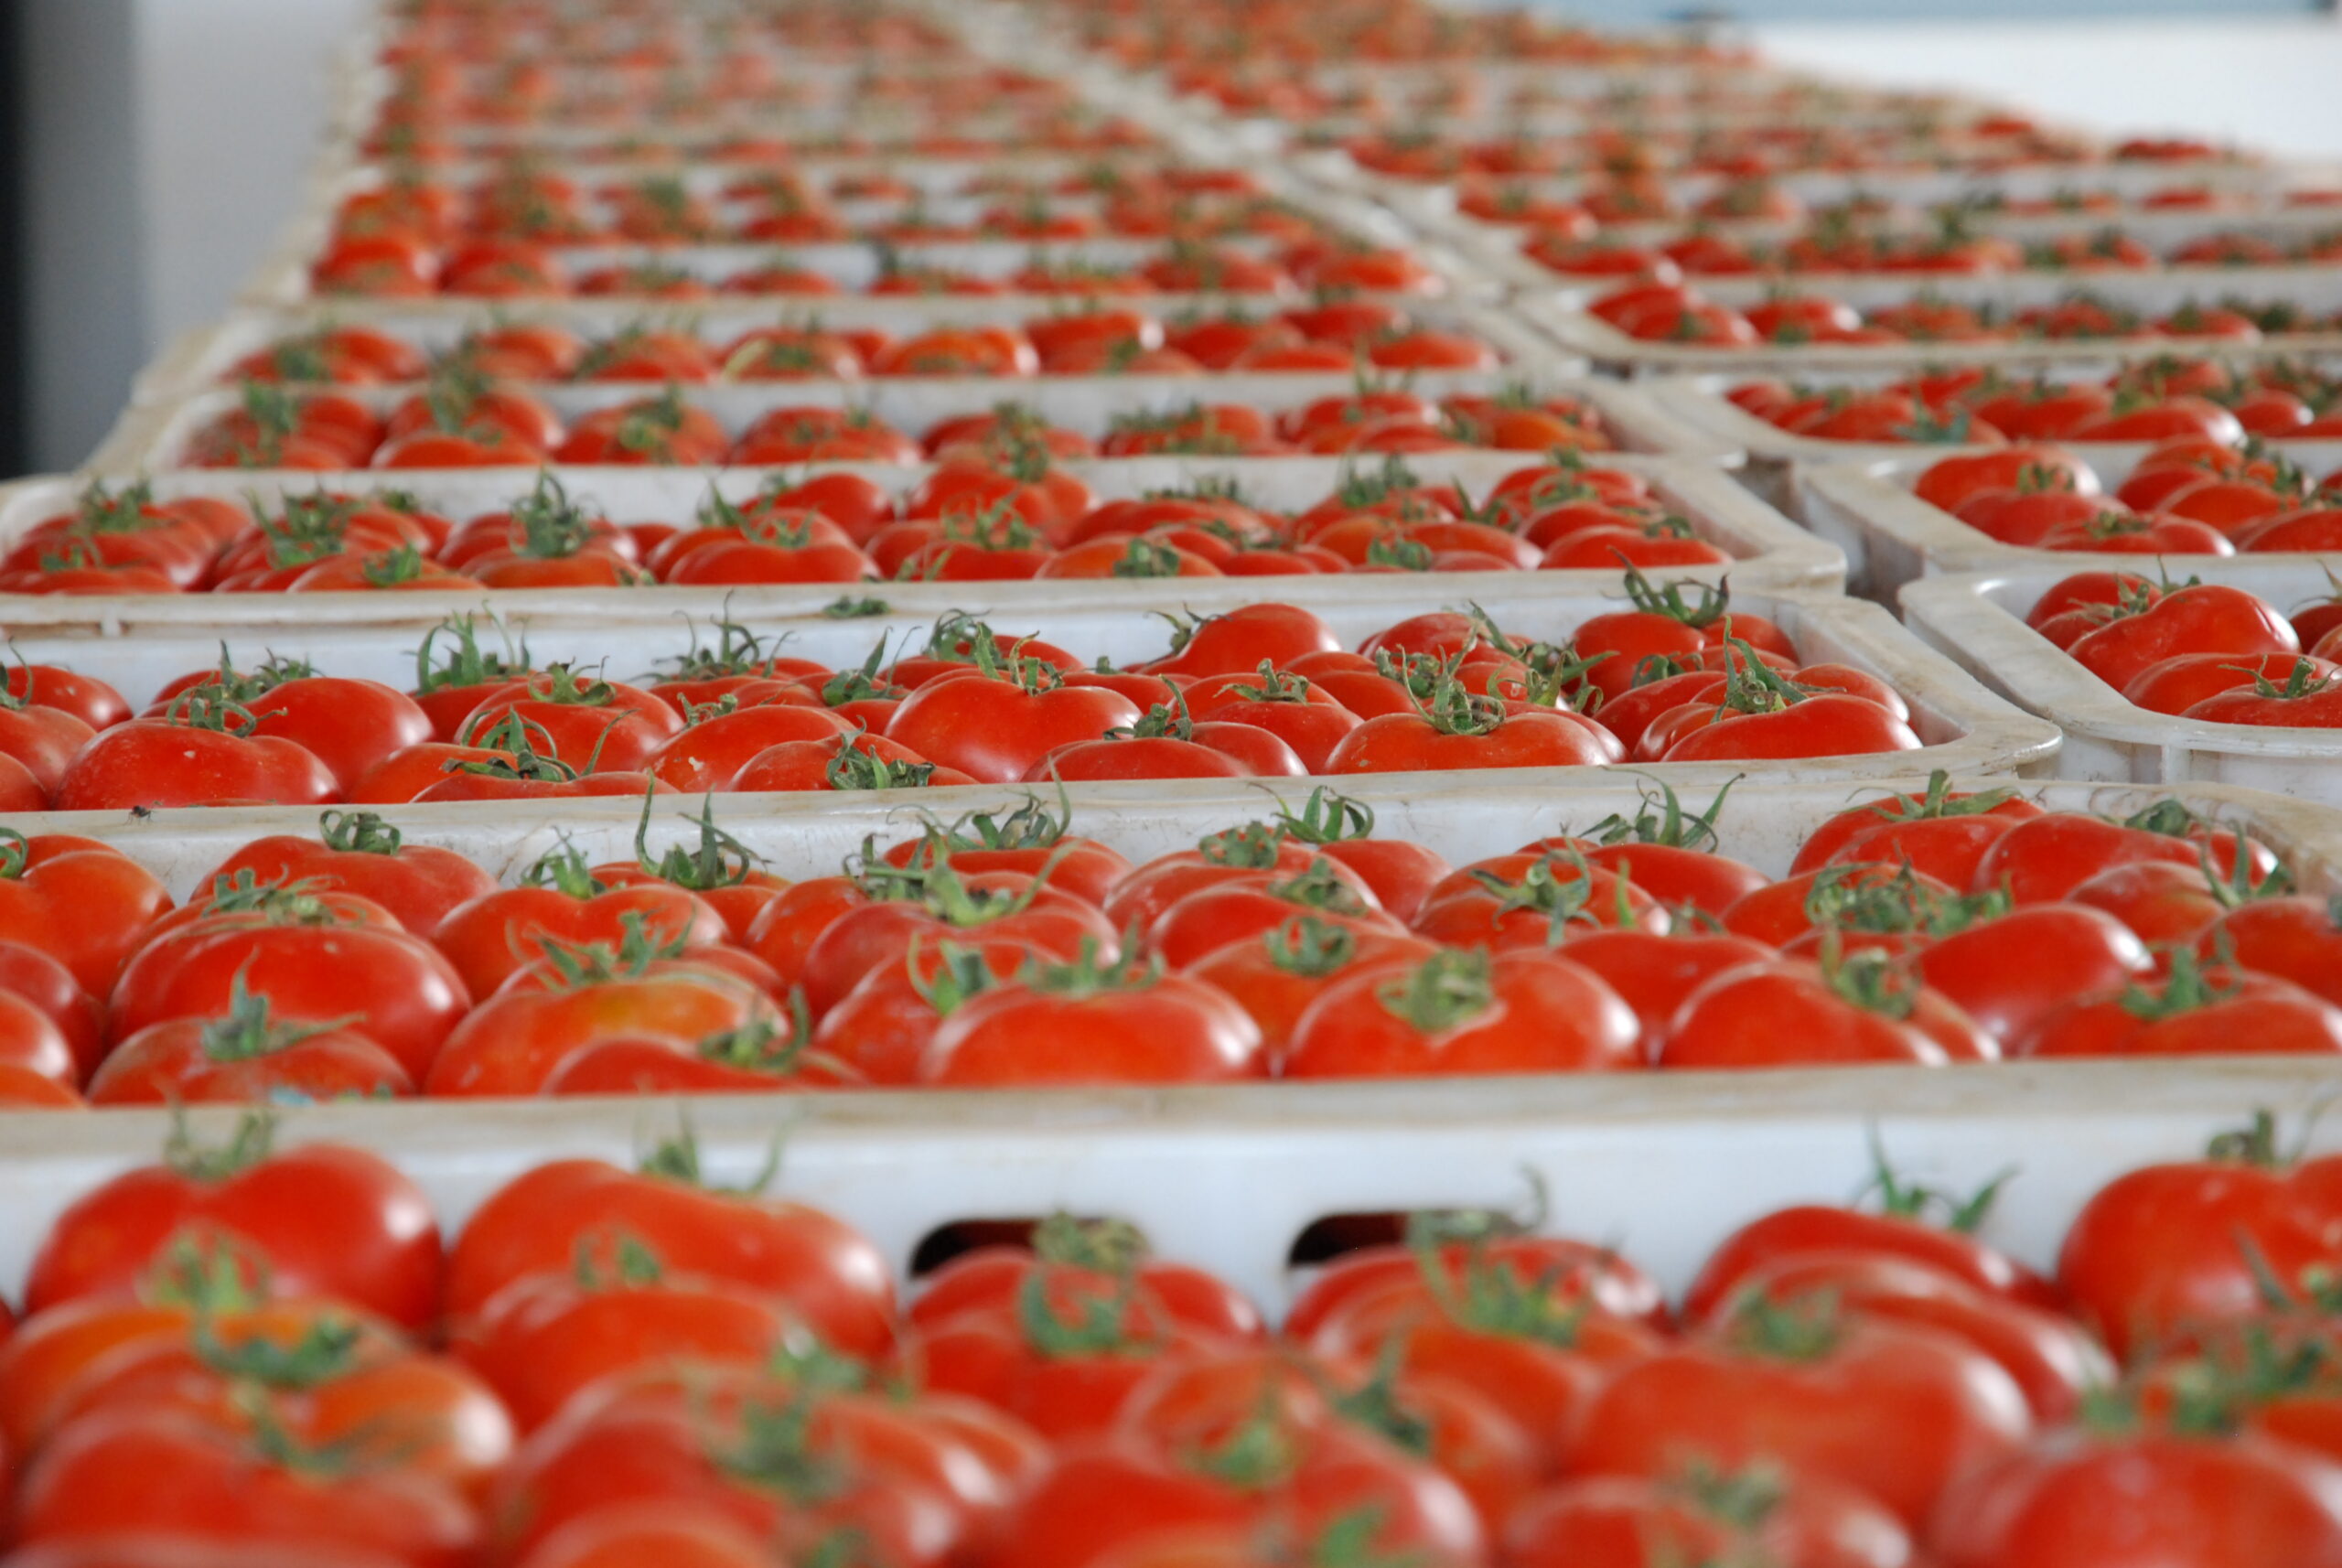 Morocco resumes tomatoes exports